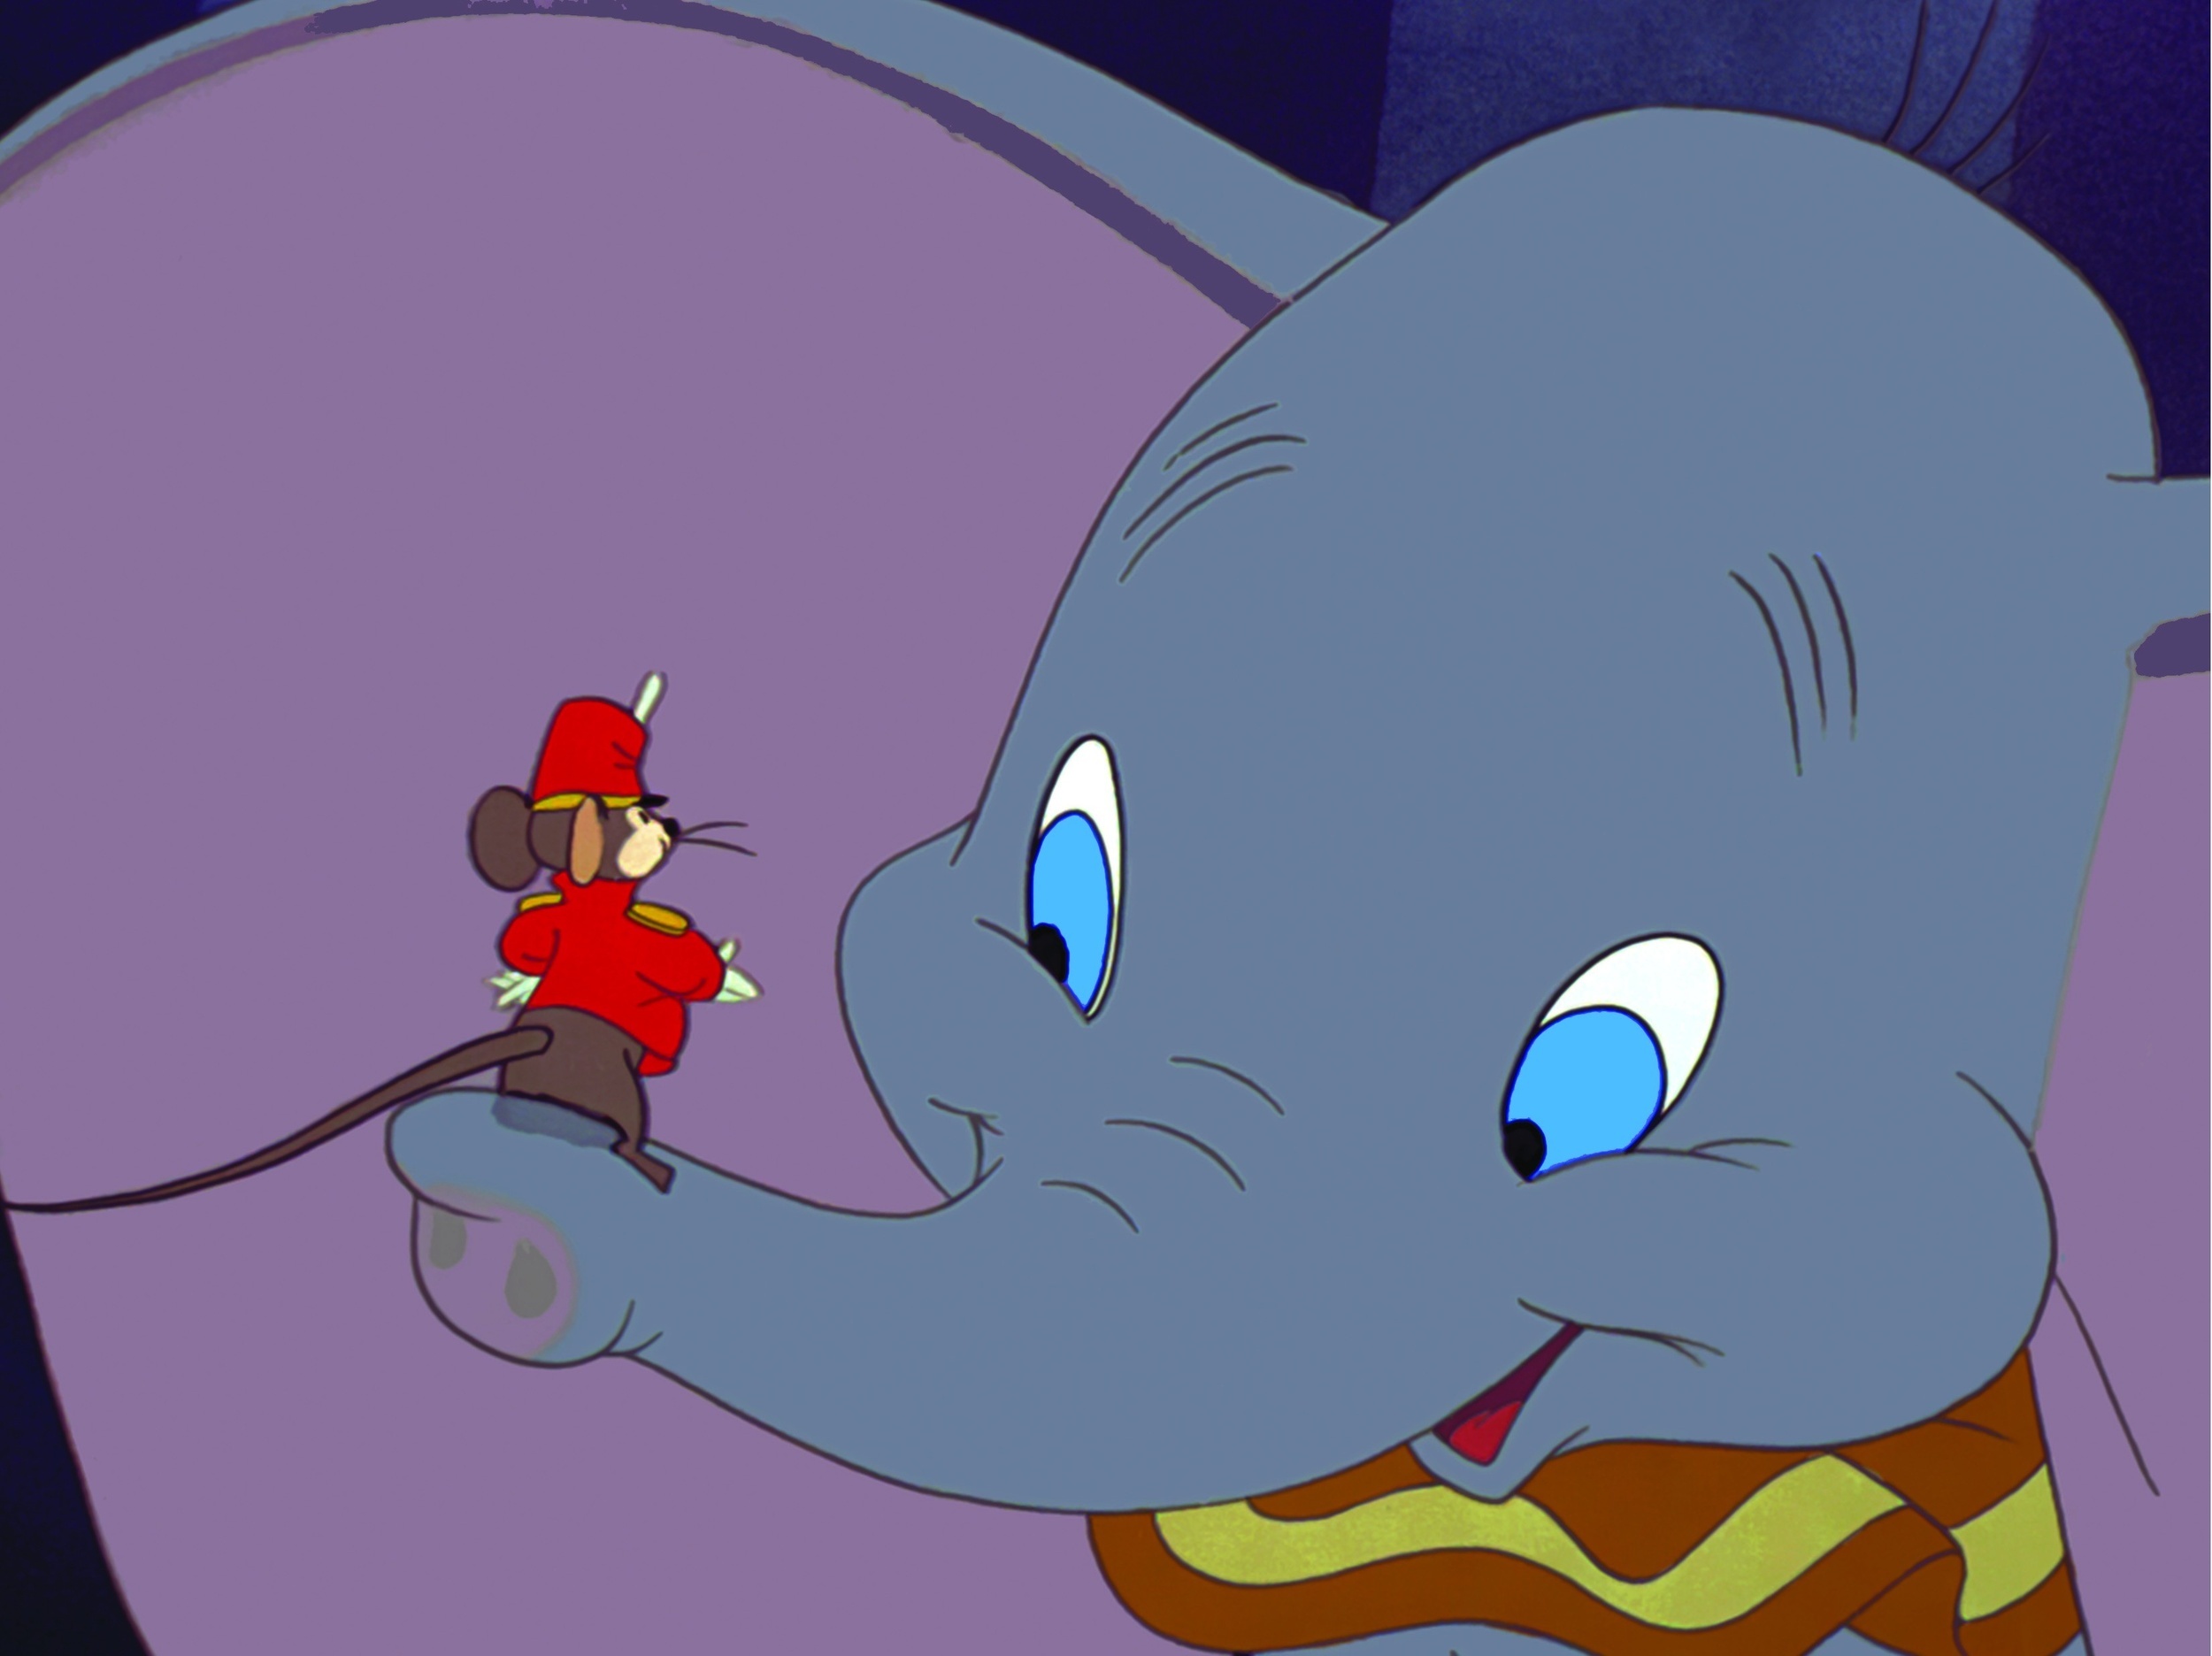 <p>The golden years of Walt Disney Studios weren't smooth sailing. Despite being the first studio to make an animated feature and the studio with the most Oscar nominations, they were still running short on funds. So they rushed this project into production, and it became another Disney classic. </p><p>The touching story of an elephant with abnormally large ears who uses them to fly and glide with the grace of a bird is about as perfect as a classic film can get. The film gave Disney the money it needed to operate and became the studio's first original feature, proving that it could create great animated stories as well as adapted ones in the past. </p><p>You may also like: <a href='https://www.yardbarker.com/entertainment/articles/20_movies_you_should_watch_late_at_night_040624/s1__39693056'>20 movies you should watch late at night</a></p>